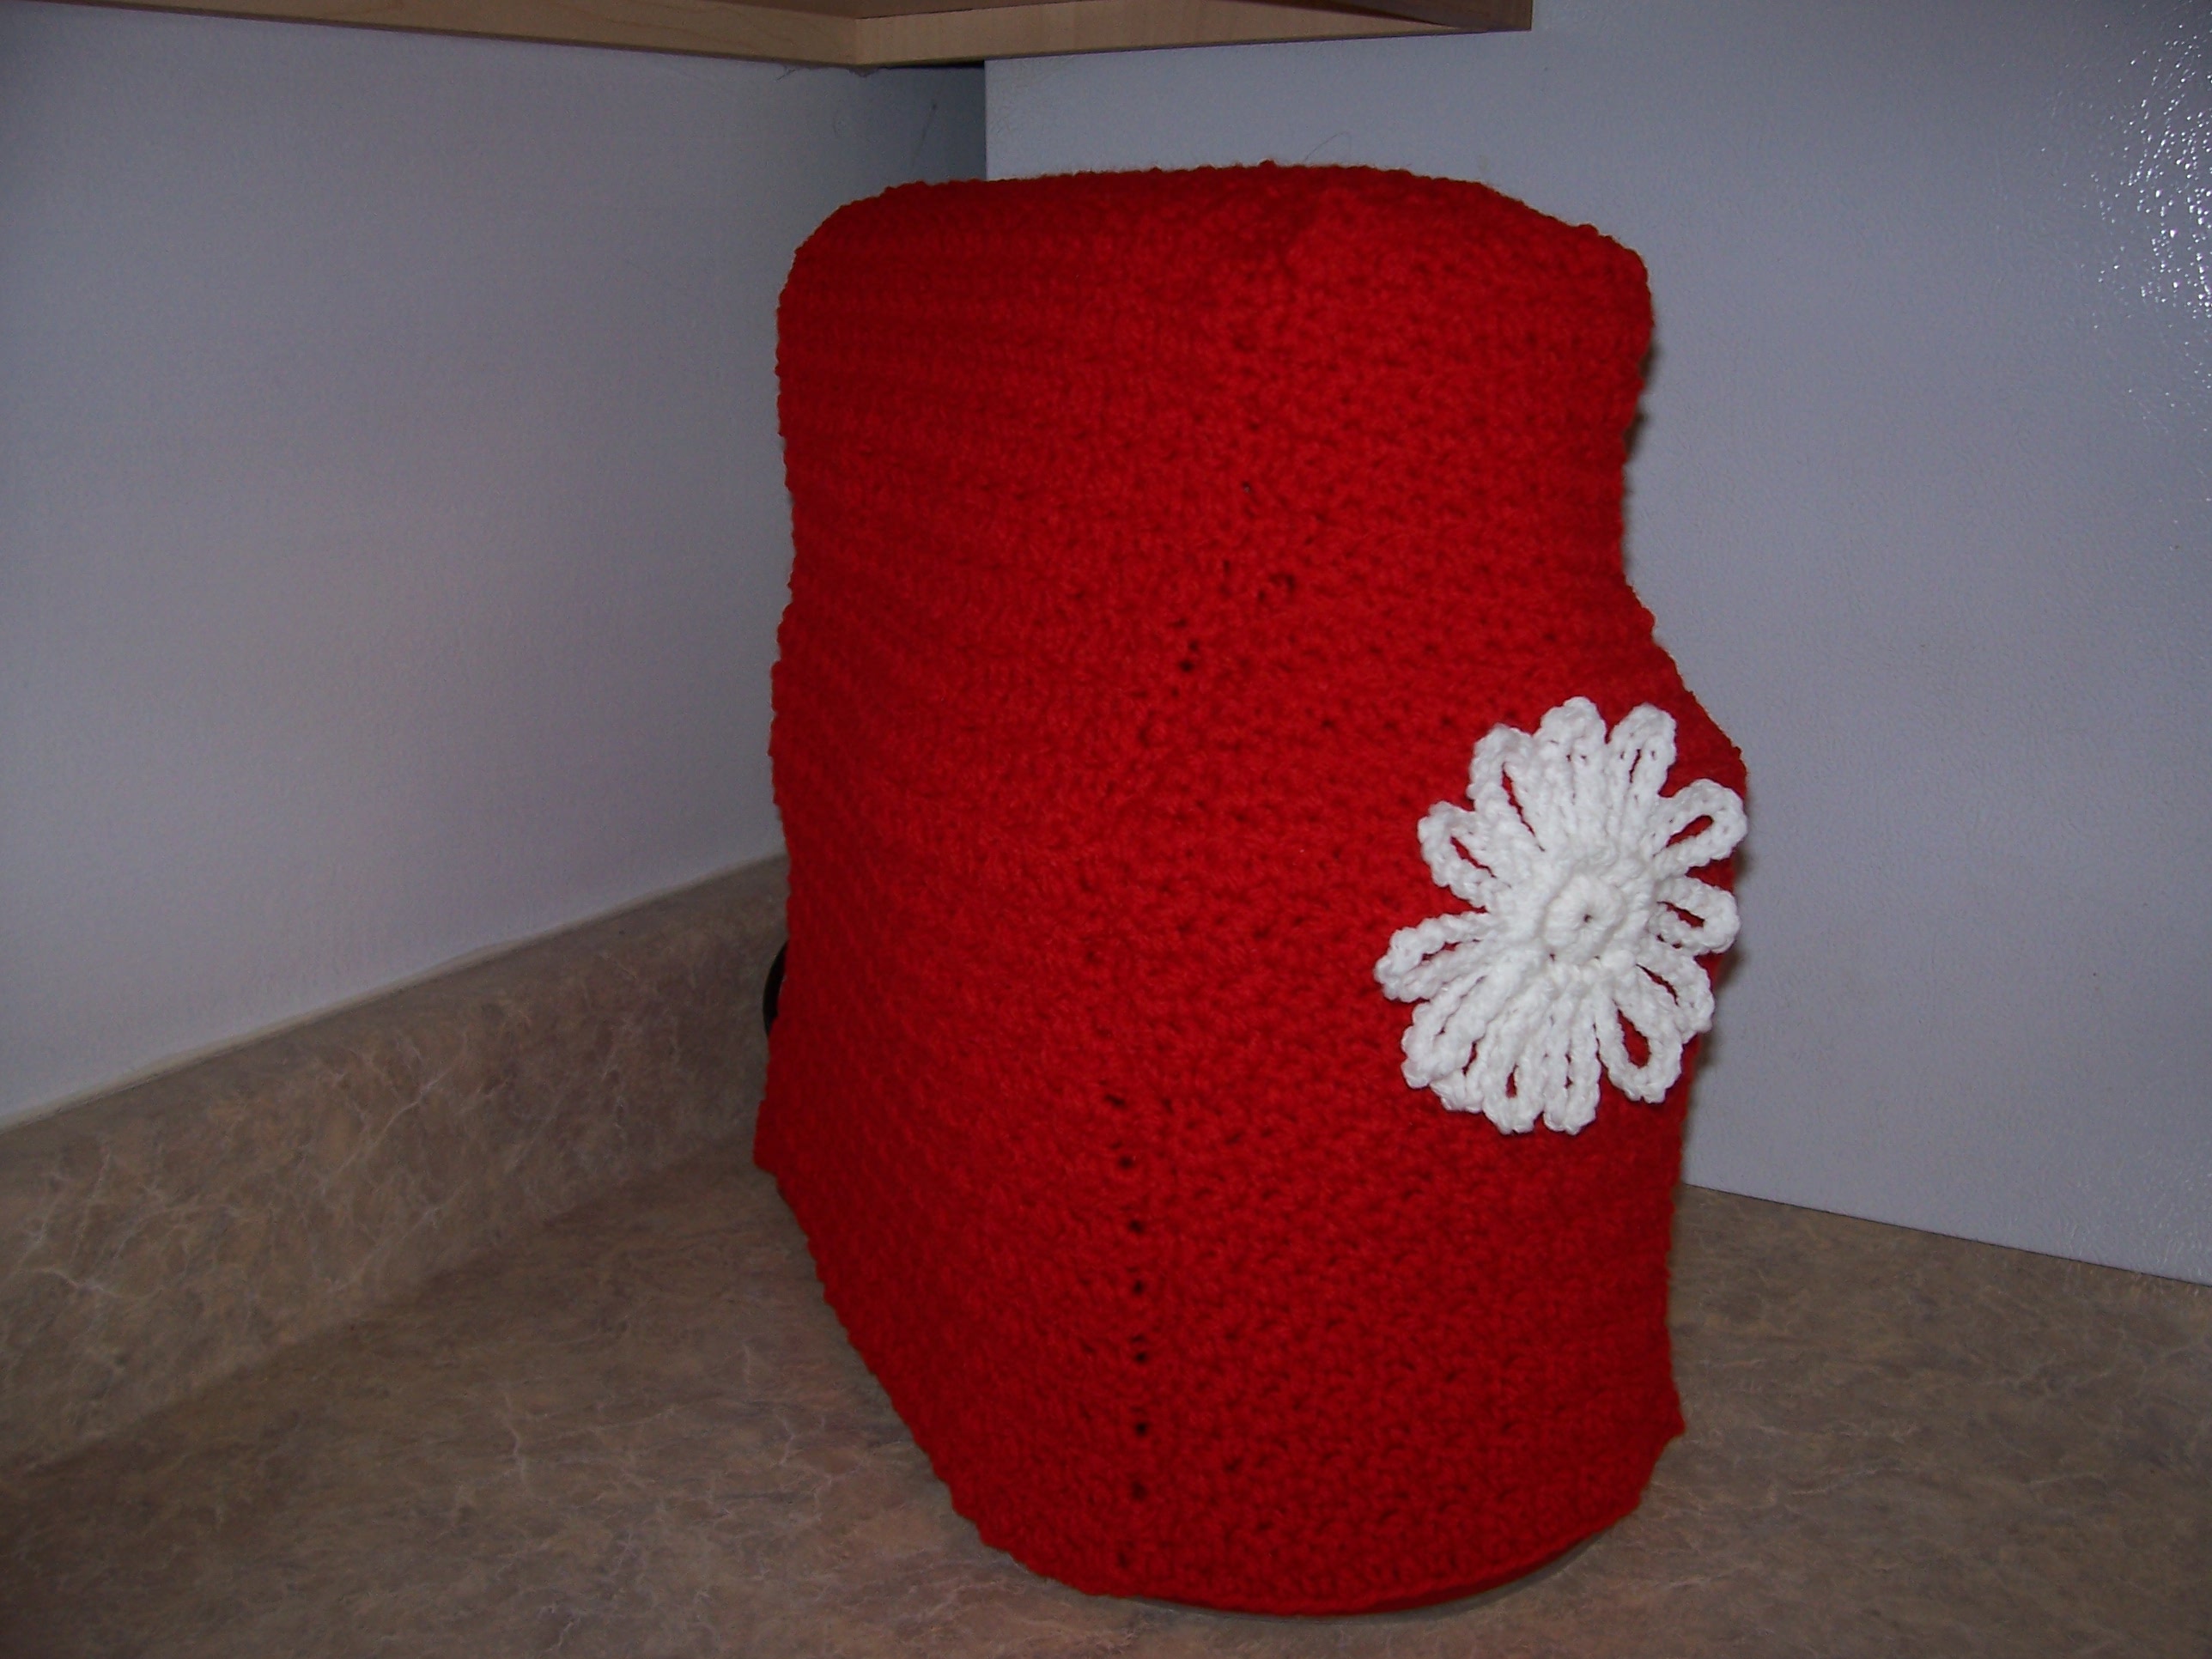 Crocheted Kitchen Aid Stand Mixer Cover